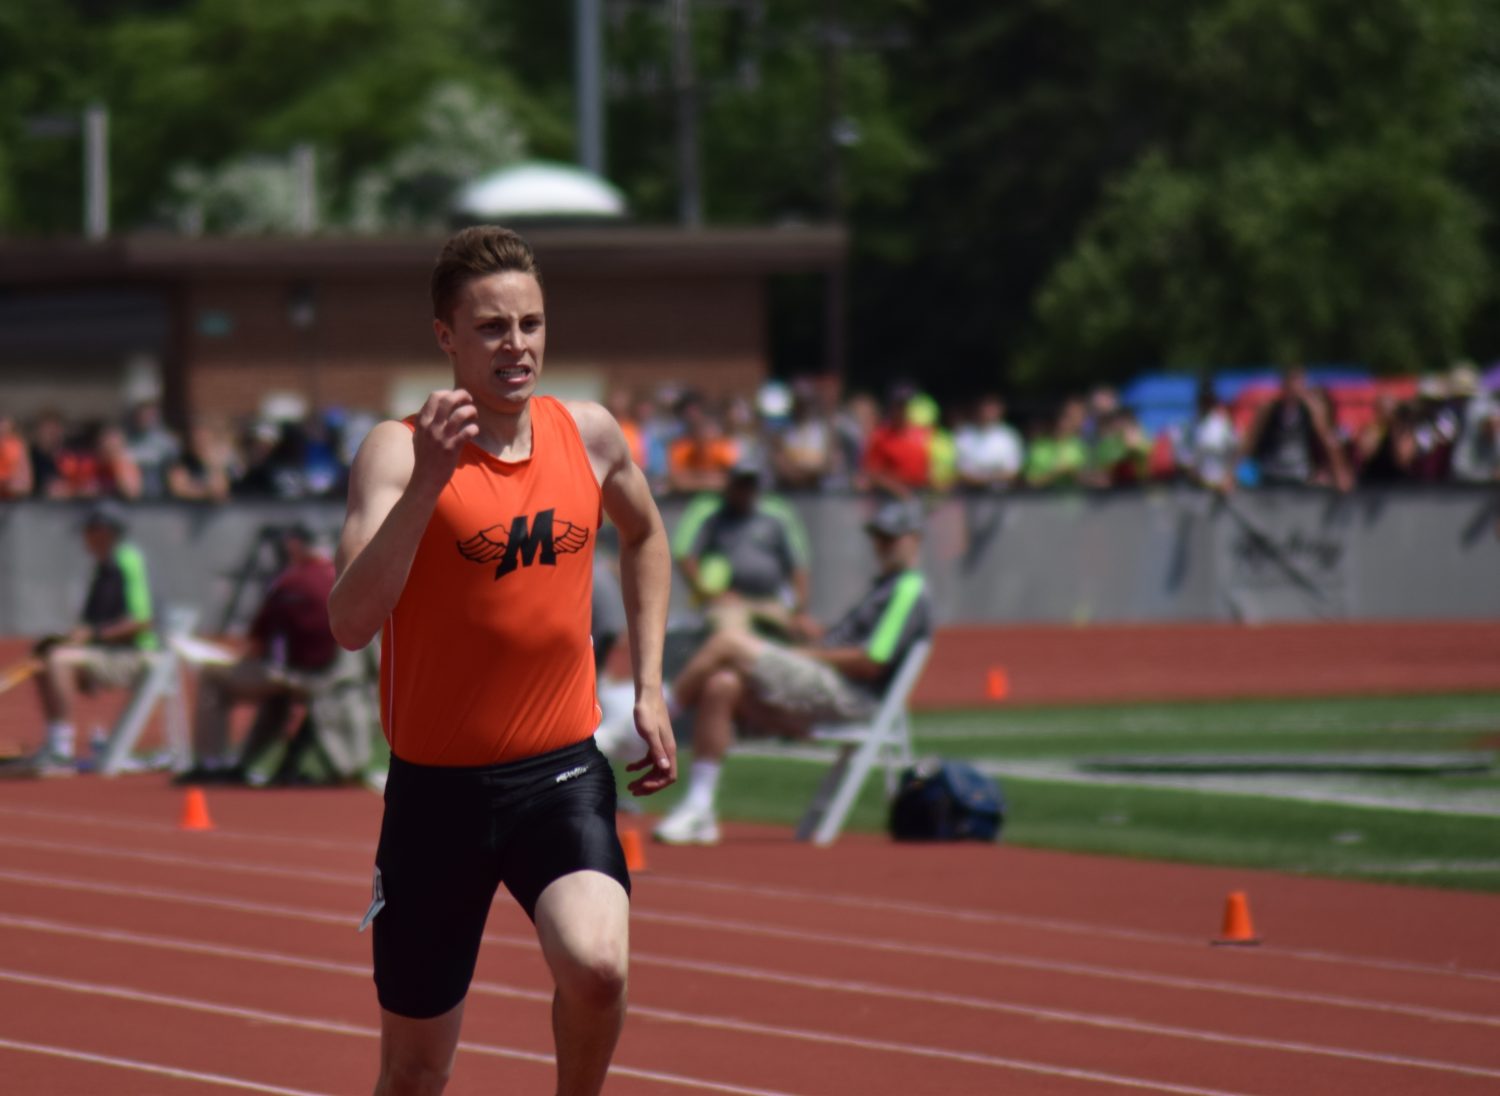 Calden Wojt runs the 400-meter dash at the 2016 WIAA State Track & Field Championships at the University of Wisconsin-La Crosse on Friday. He was 12th in 49.92 seconds, missing out on the final qualifying spot for Saturday by just 0.11 seconds.